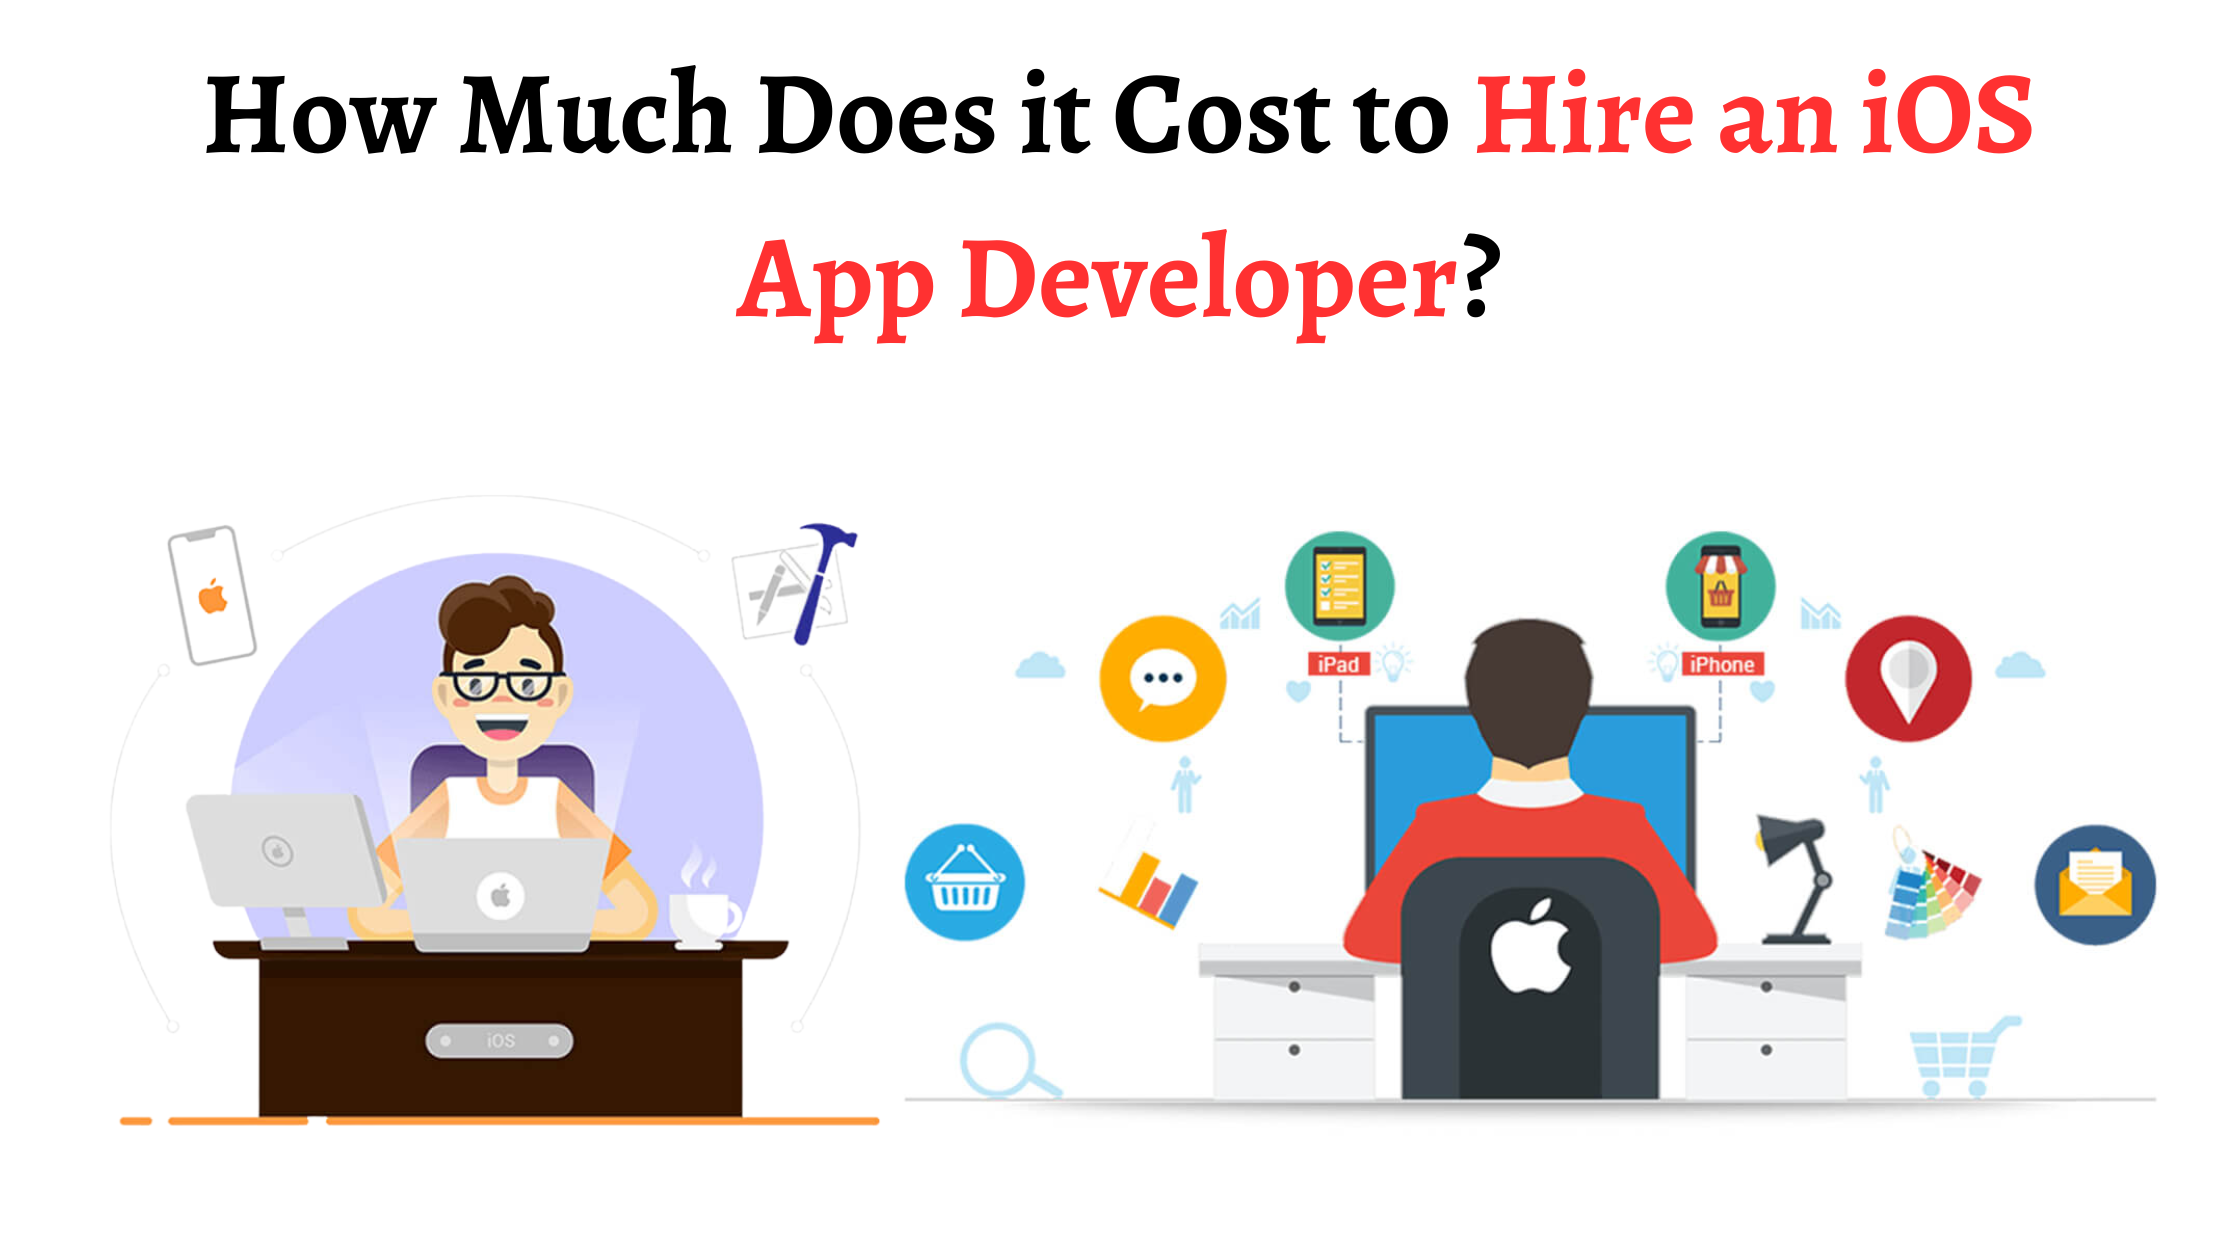 How Much Does it Cost to Hire an iOS App Developer